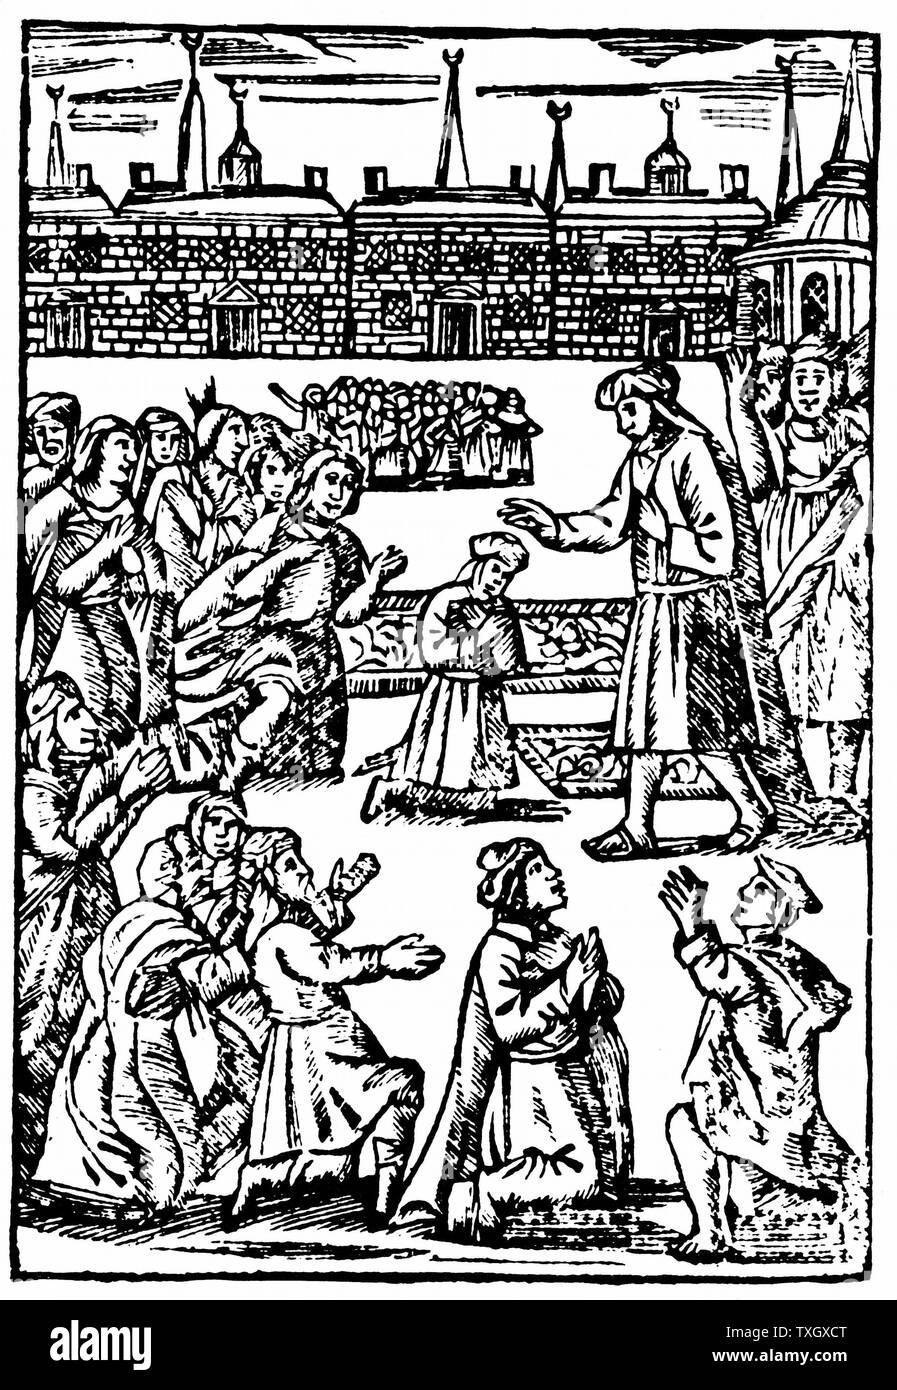 Shabbetai Zevi, Turkish-born Jew who claimed to be Messiah. Here blessing Jewish congregation at Smyrna c1665. From 'The Counterfeit Messiah or False Christ of the Jews' Woodcut Stock Photo